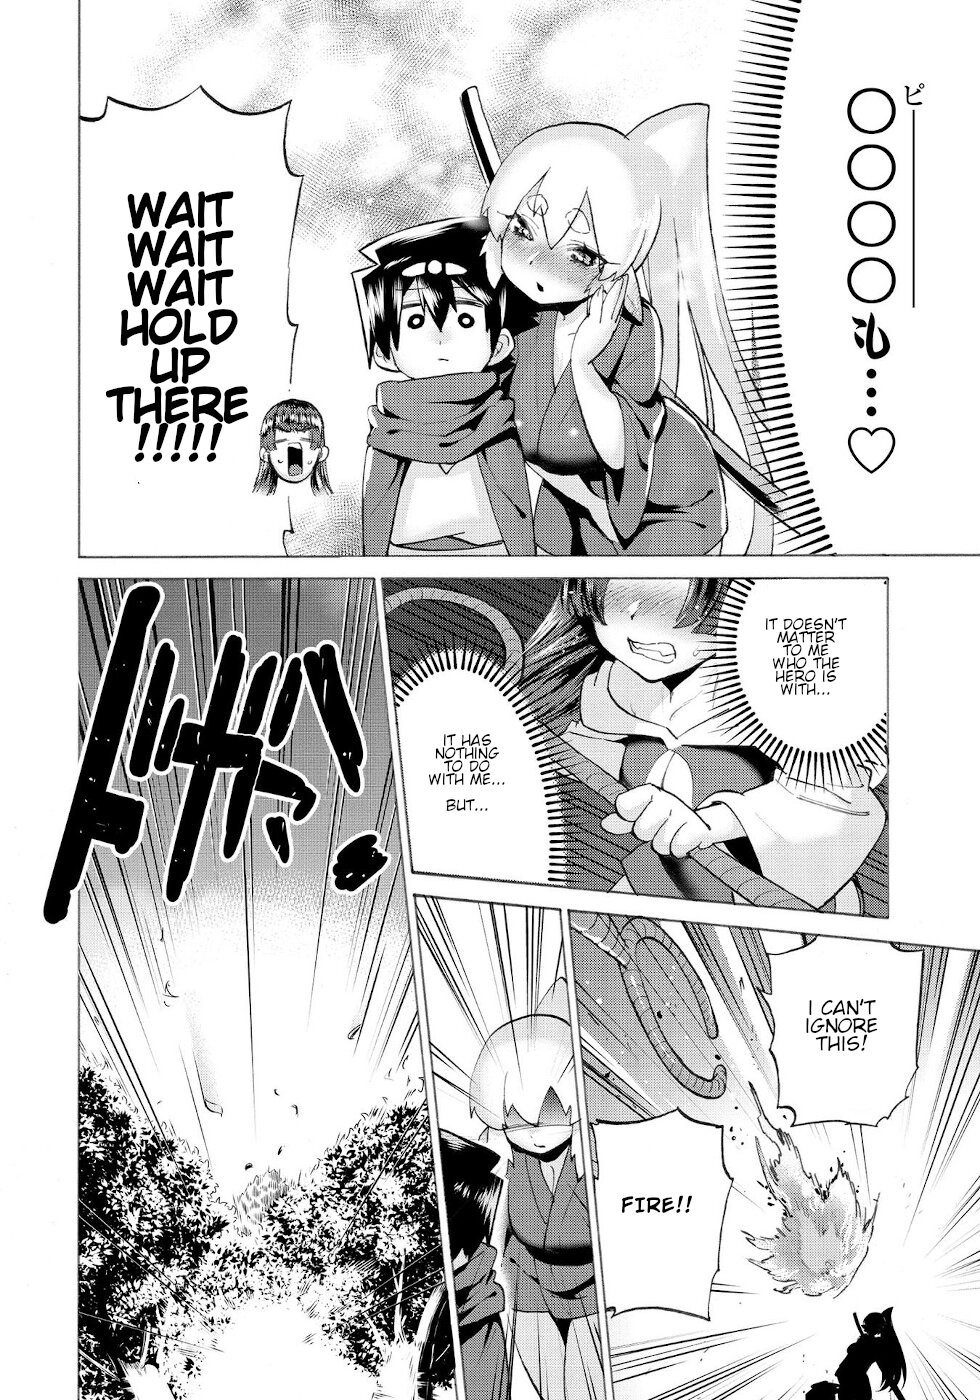 Love Comedy Hero & the Princess of Darkness Vol. 2 Ch. 16.1 Hero And The Female Warrior